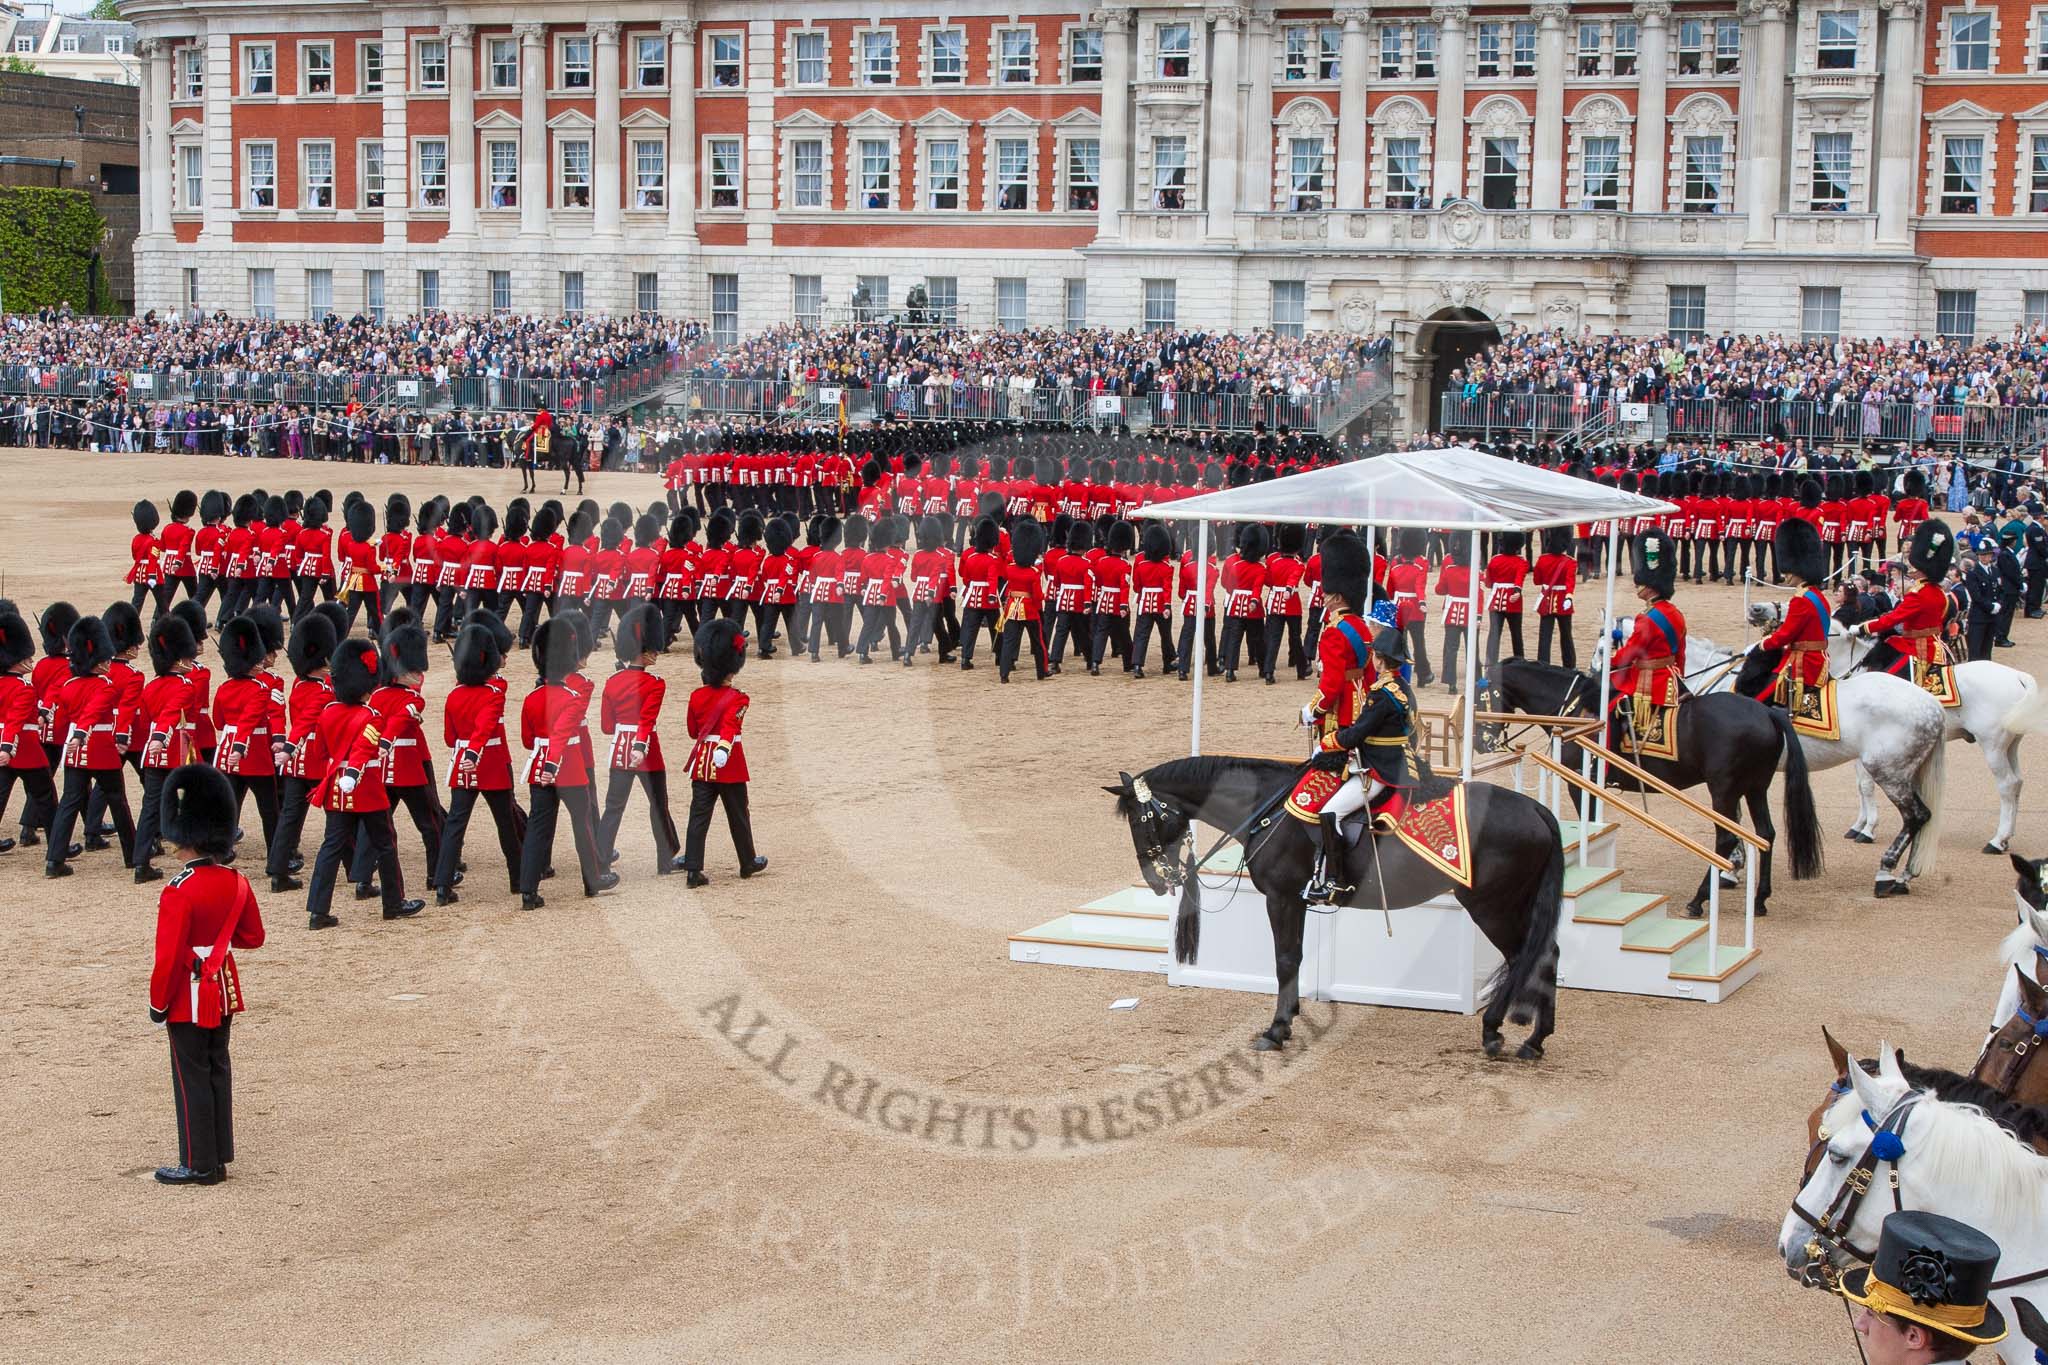 Trooping the Colour 2013: The March Past in Quick Time - No. 1 to No. 4 Guard marching past the dais. Image #611, 15 June 2013 11:46 Horse Guards Parade, London, UK